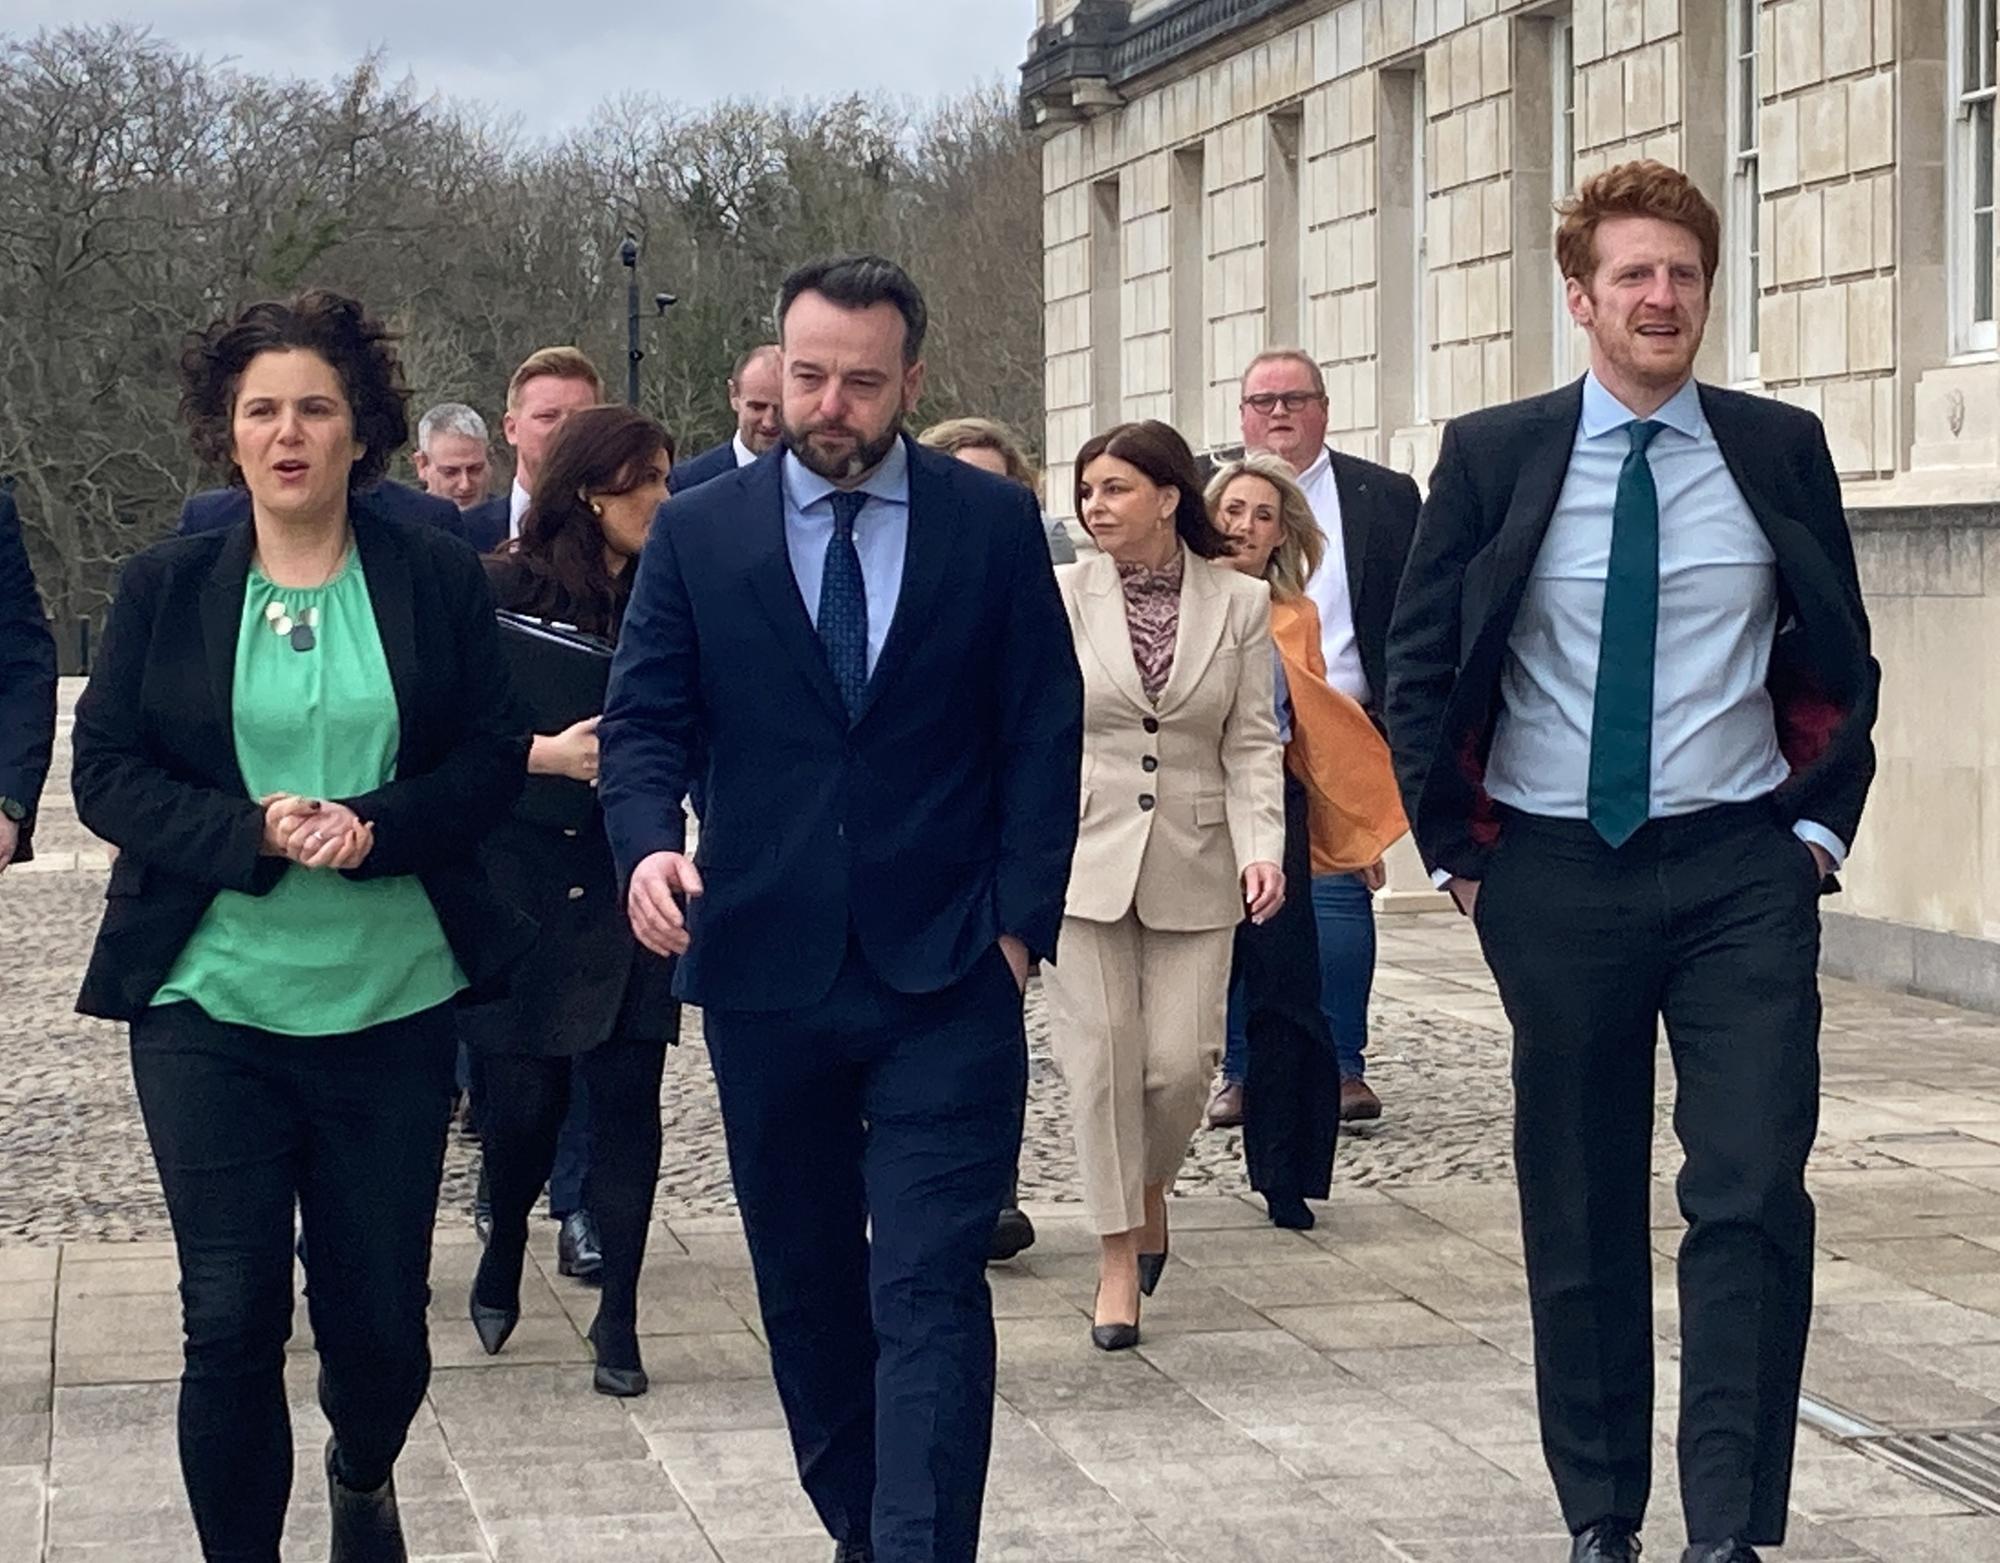 Sinn Fein, DUP and TUV accused of ‘blocking Assembly reform’ after SDLP opposition motion falls